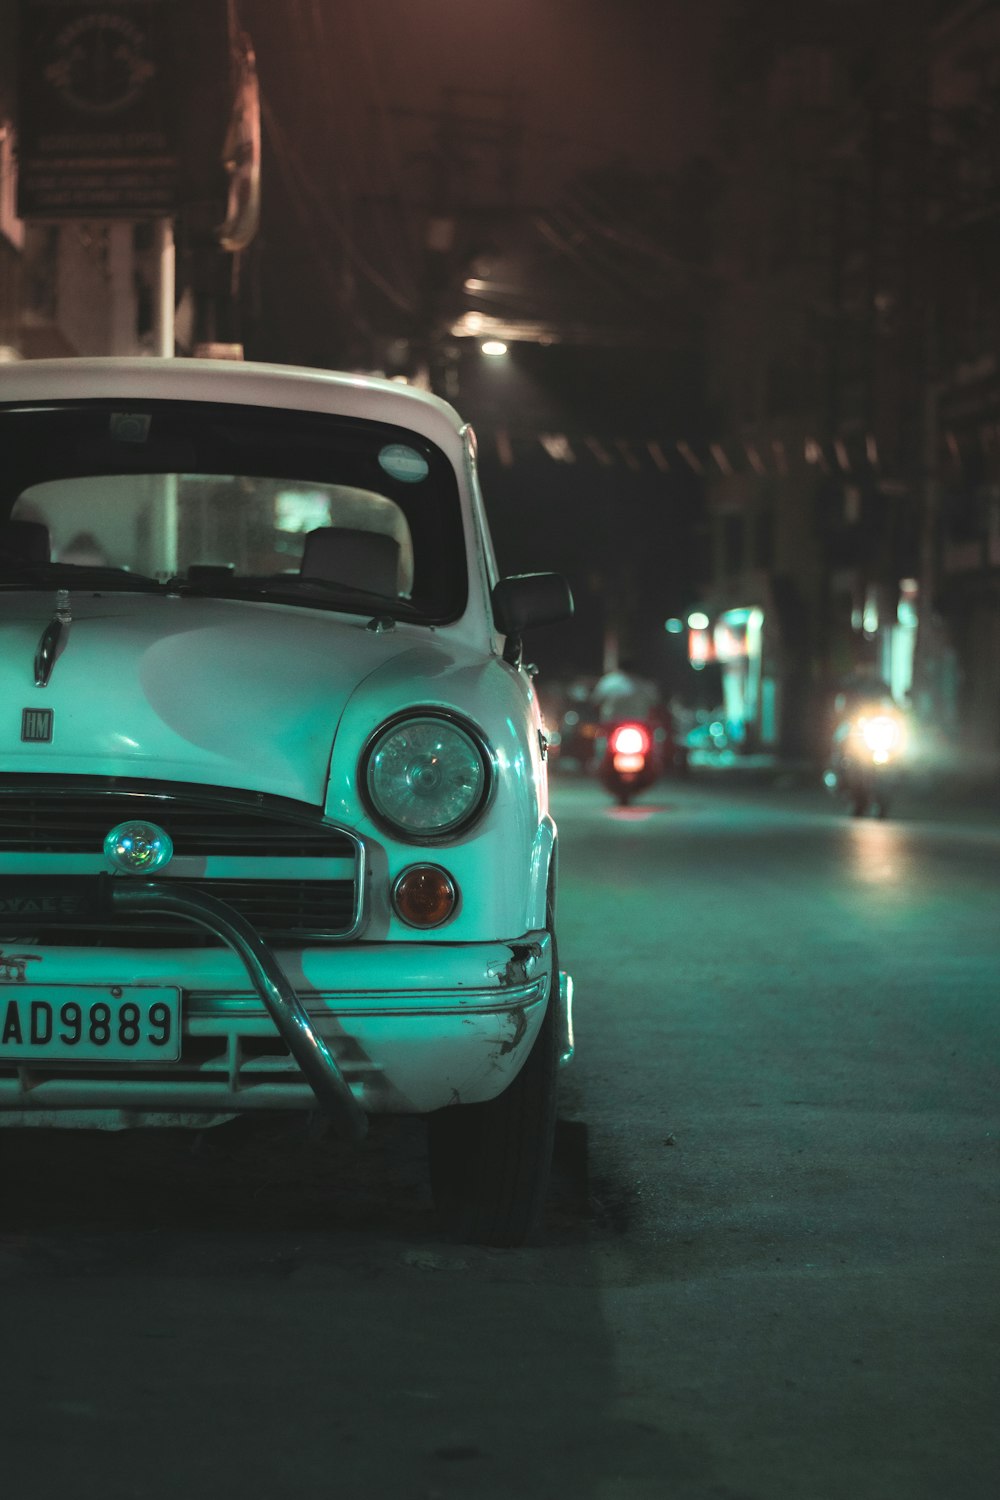 teal volkswagen beetle on road during night time